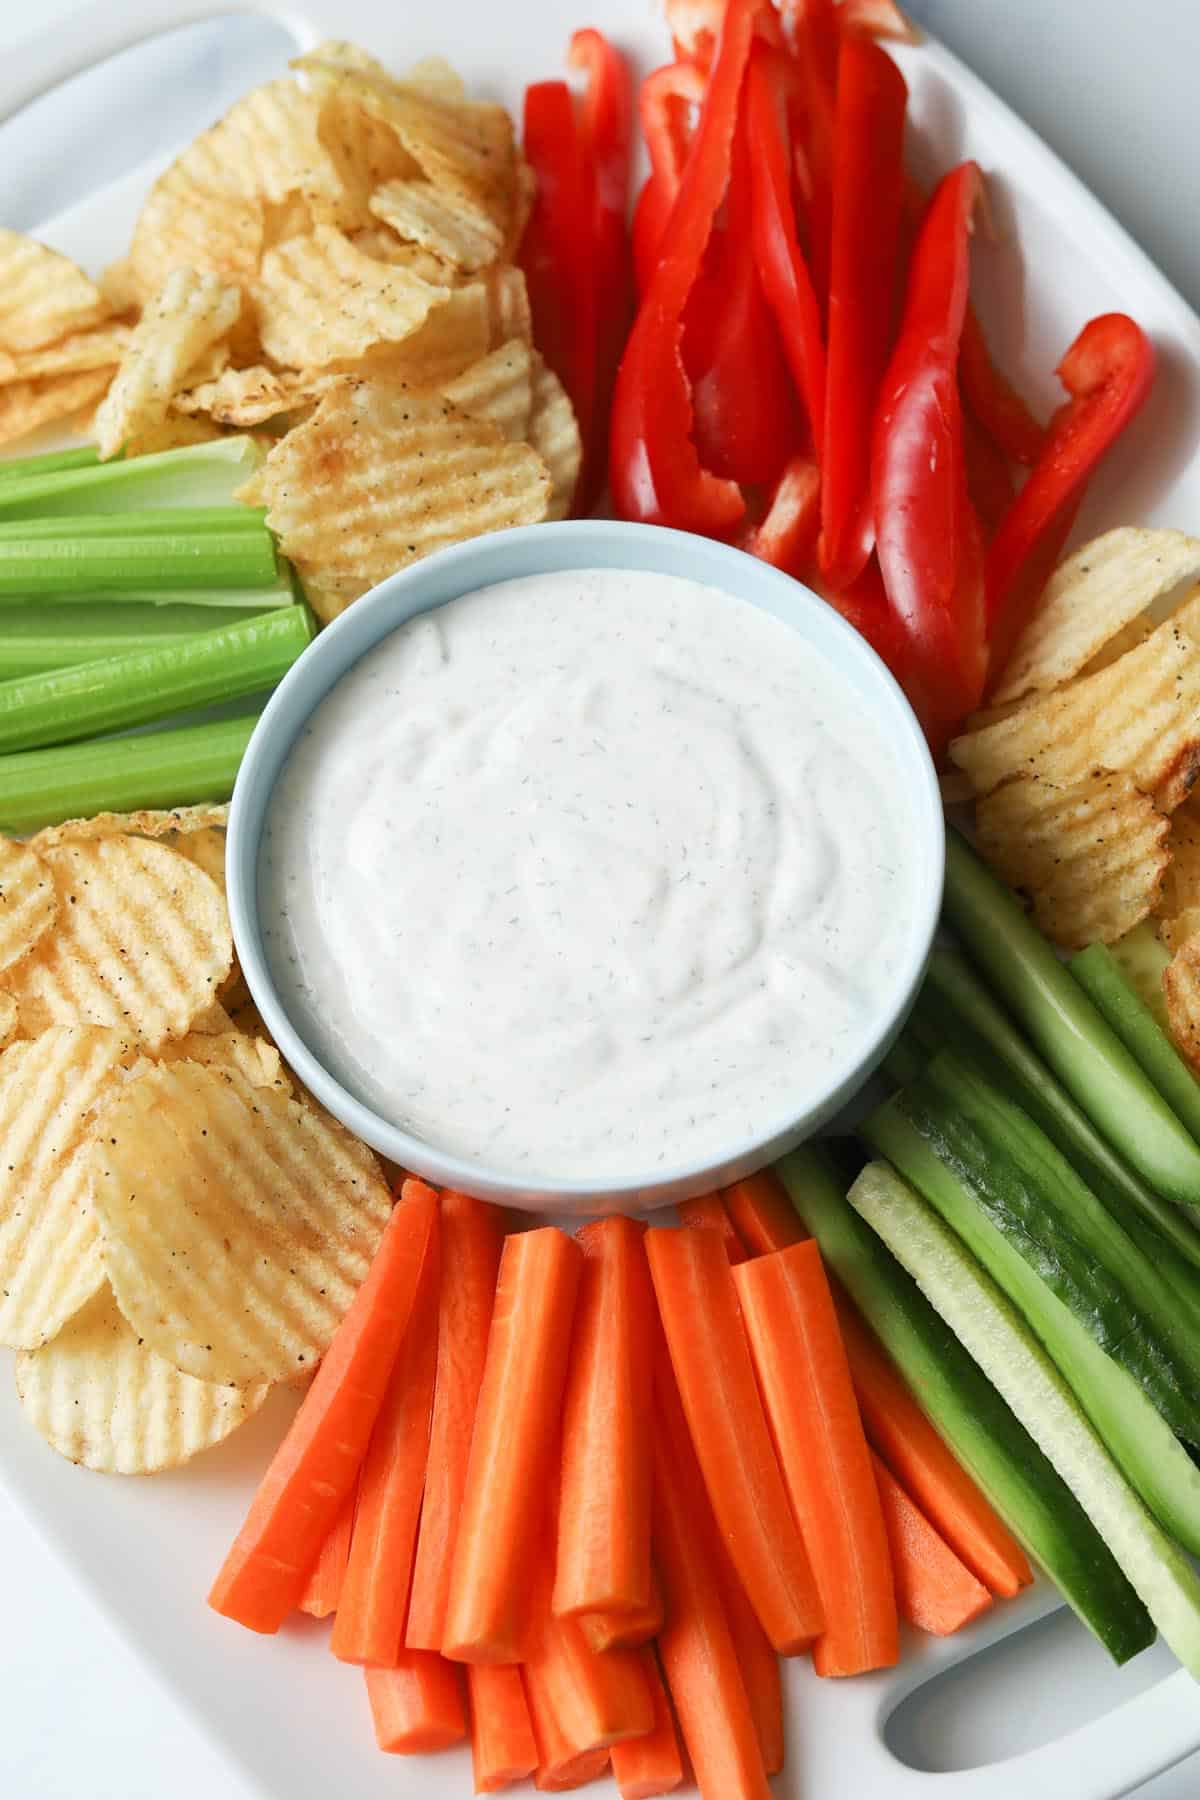 Ranch dip with chips and veggies platter.